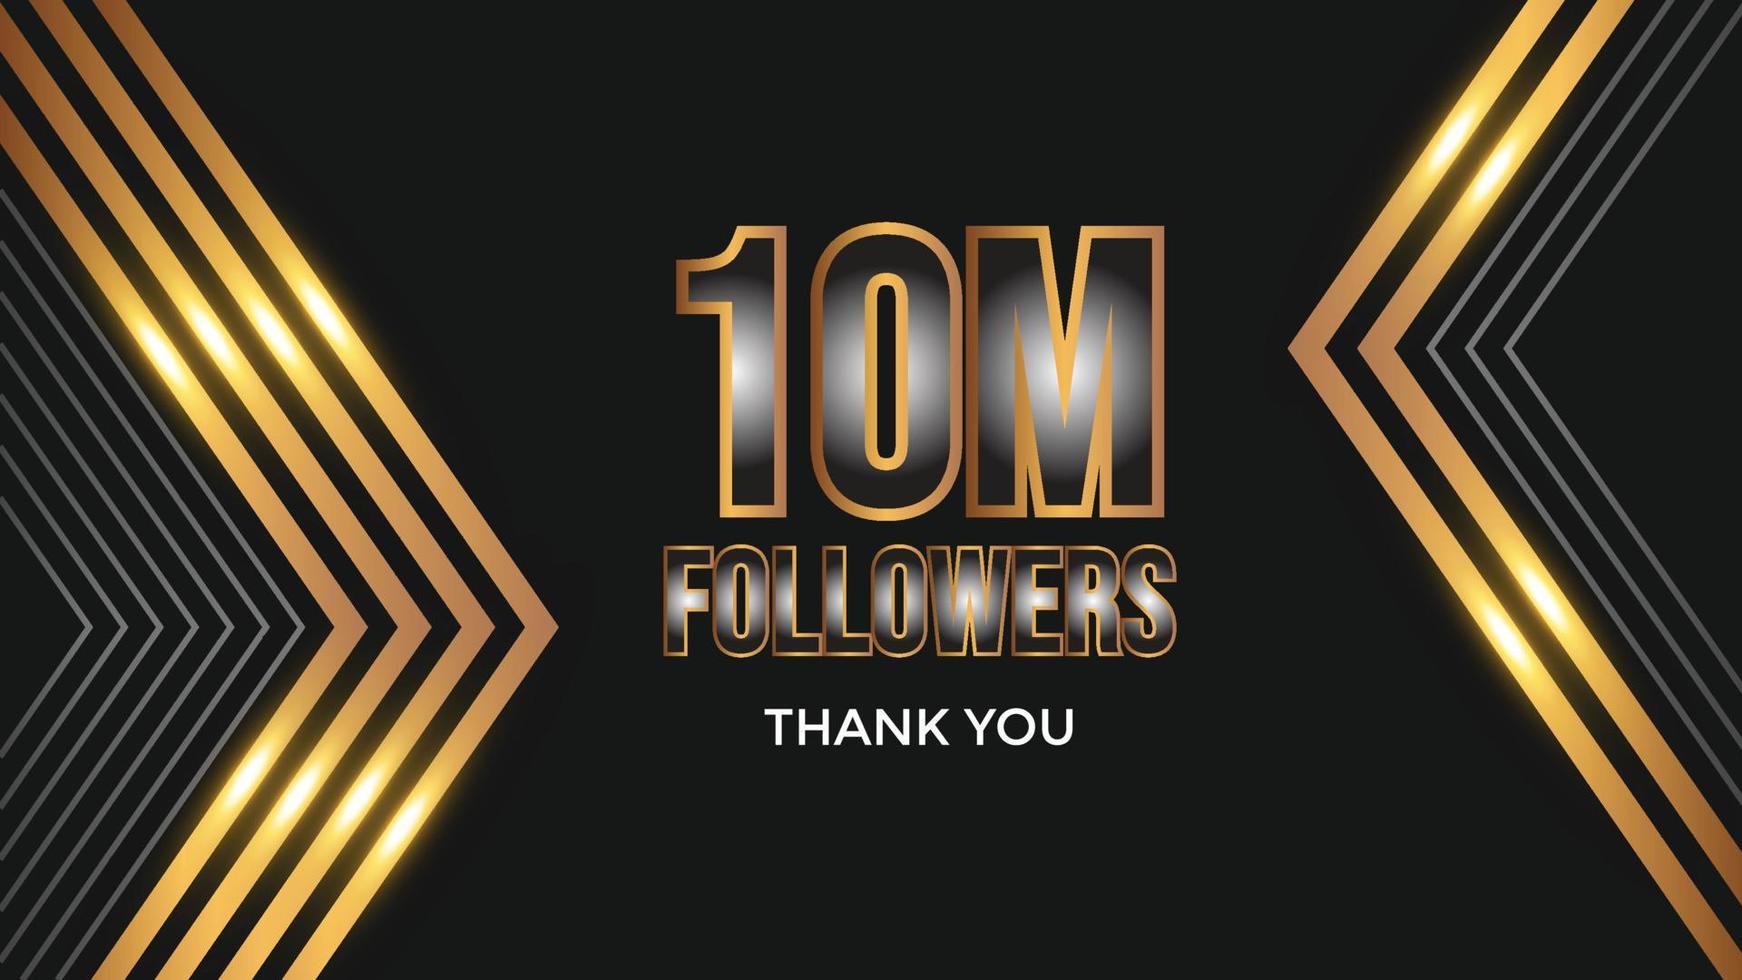 celebration 10m subscribers template for social media. 10m followers thank you vector